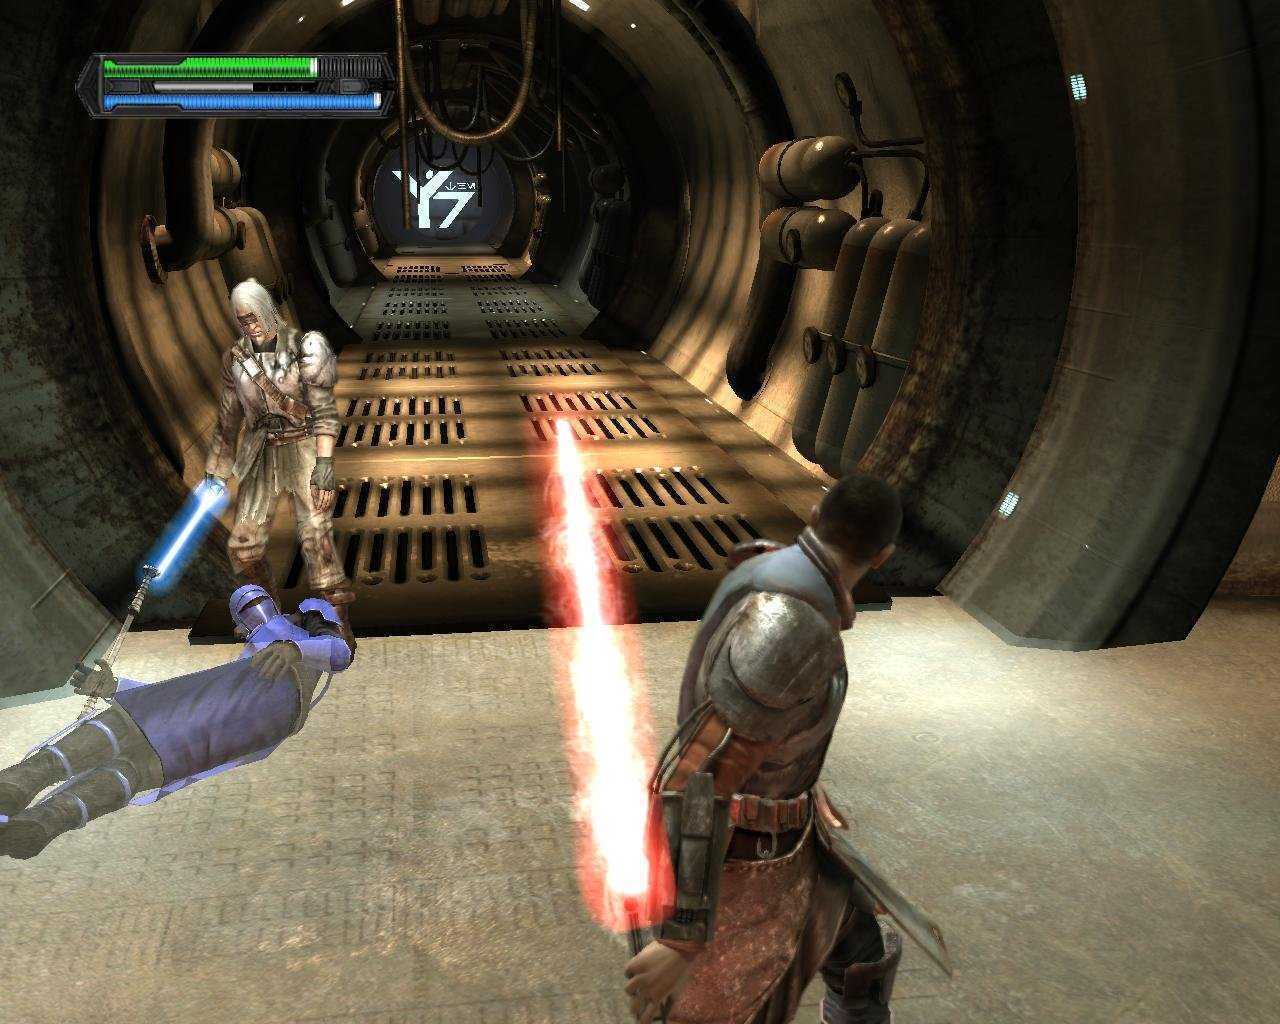 Star wars 1 игра. Star Wars the Force unleashed Ultimate Sith Edition (2009). Стар ВАРС the Force unleashed 1. Игра Star Wars: the Force unleashed II. Star Wars: the Force unleashed - Ultimate Sith Edition.